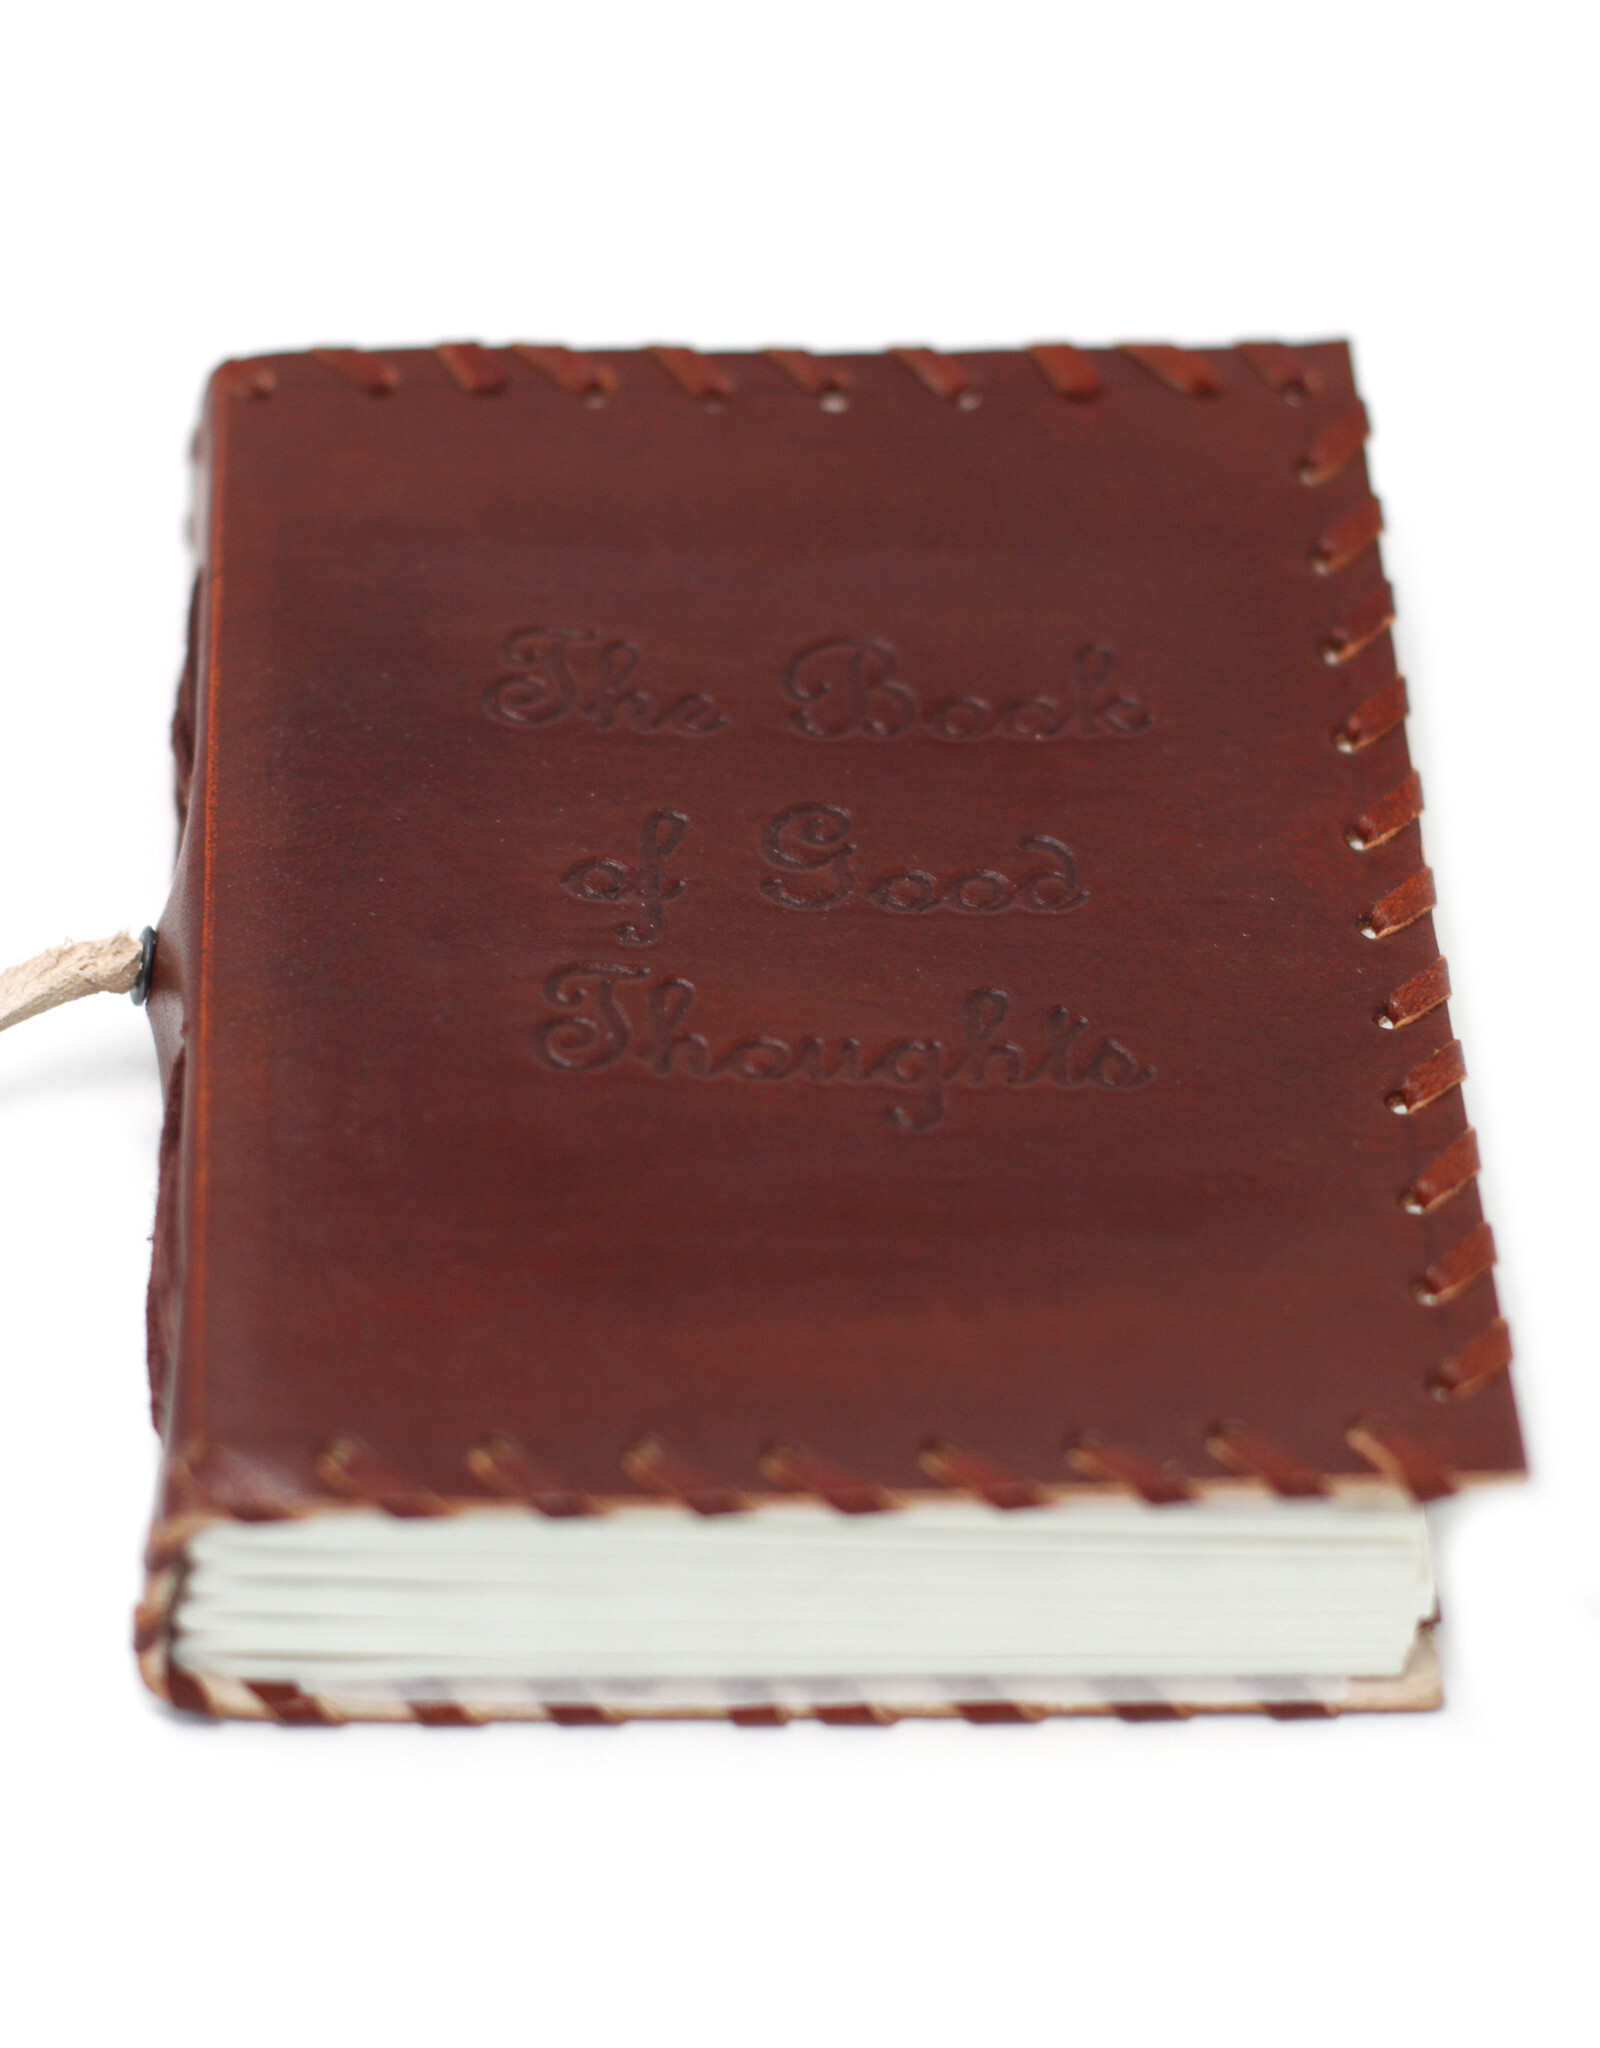 AWG Miscellaneous - Leather Notebook with wrap Book of Thoughts 15.5x12cm